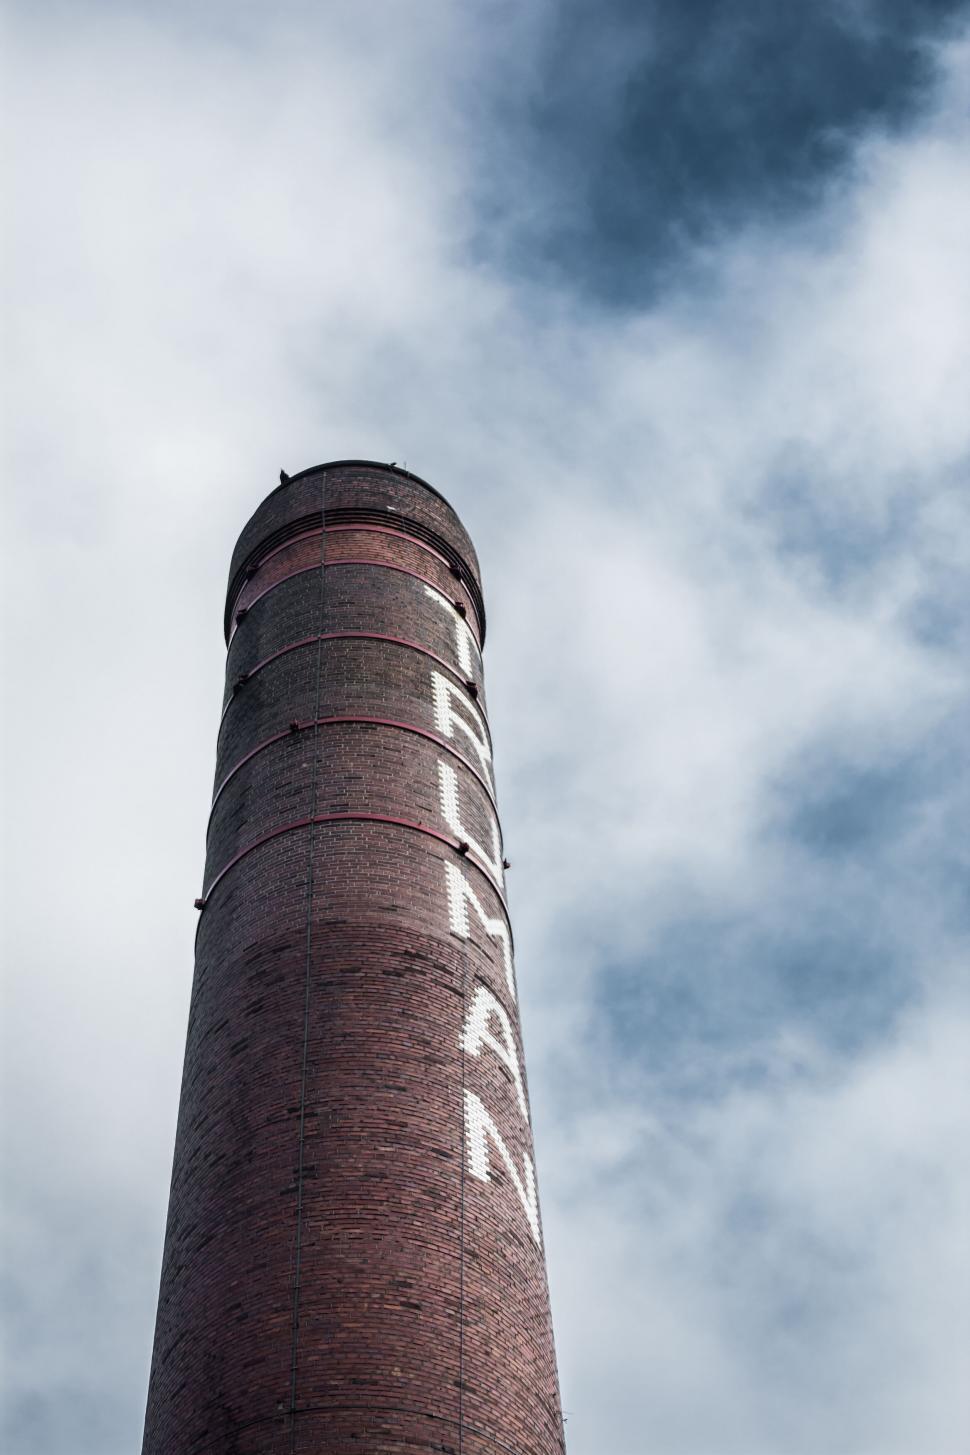 Free Image of A brick tower with white text on it 